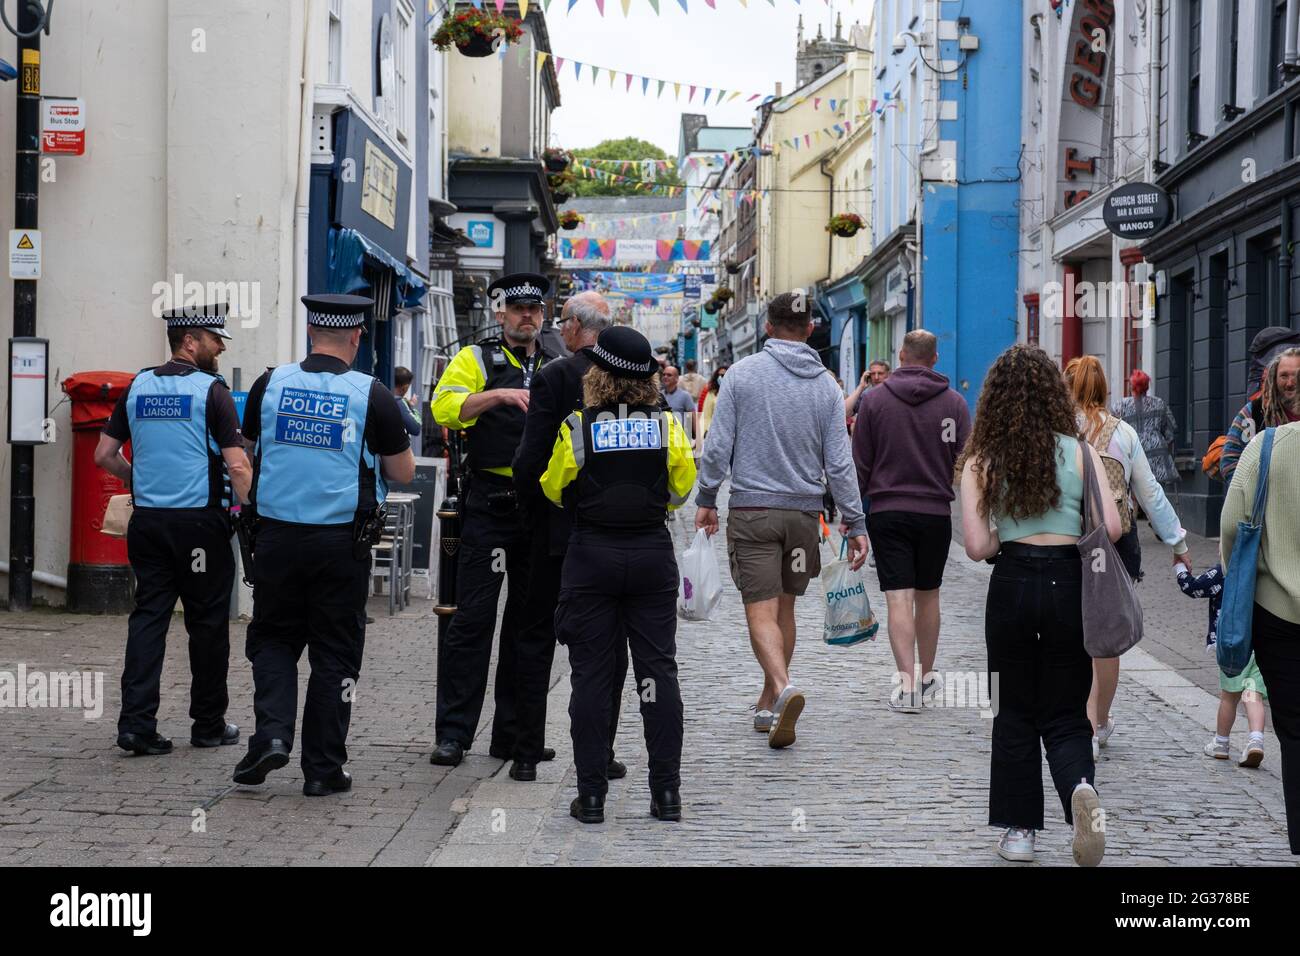 Police forces from over the UK including Heddlu working the Falmouth main streets during the G7 summit in Falmouth. Friendly group chat with public Stock Photo